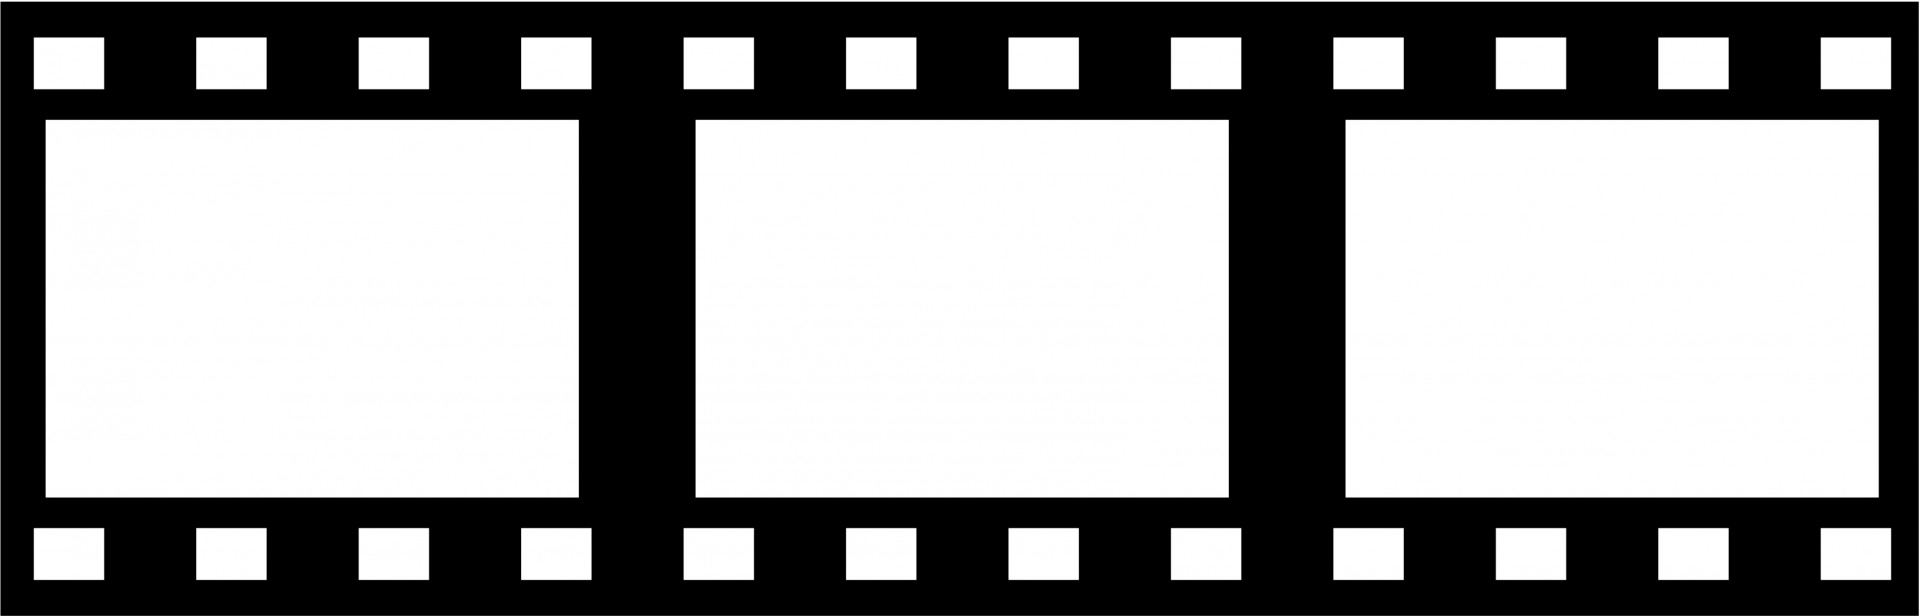 movie clipart free download - photo #36